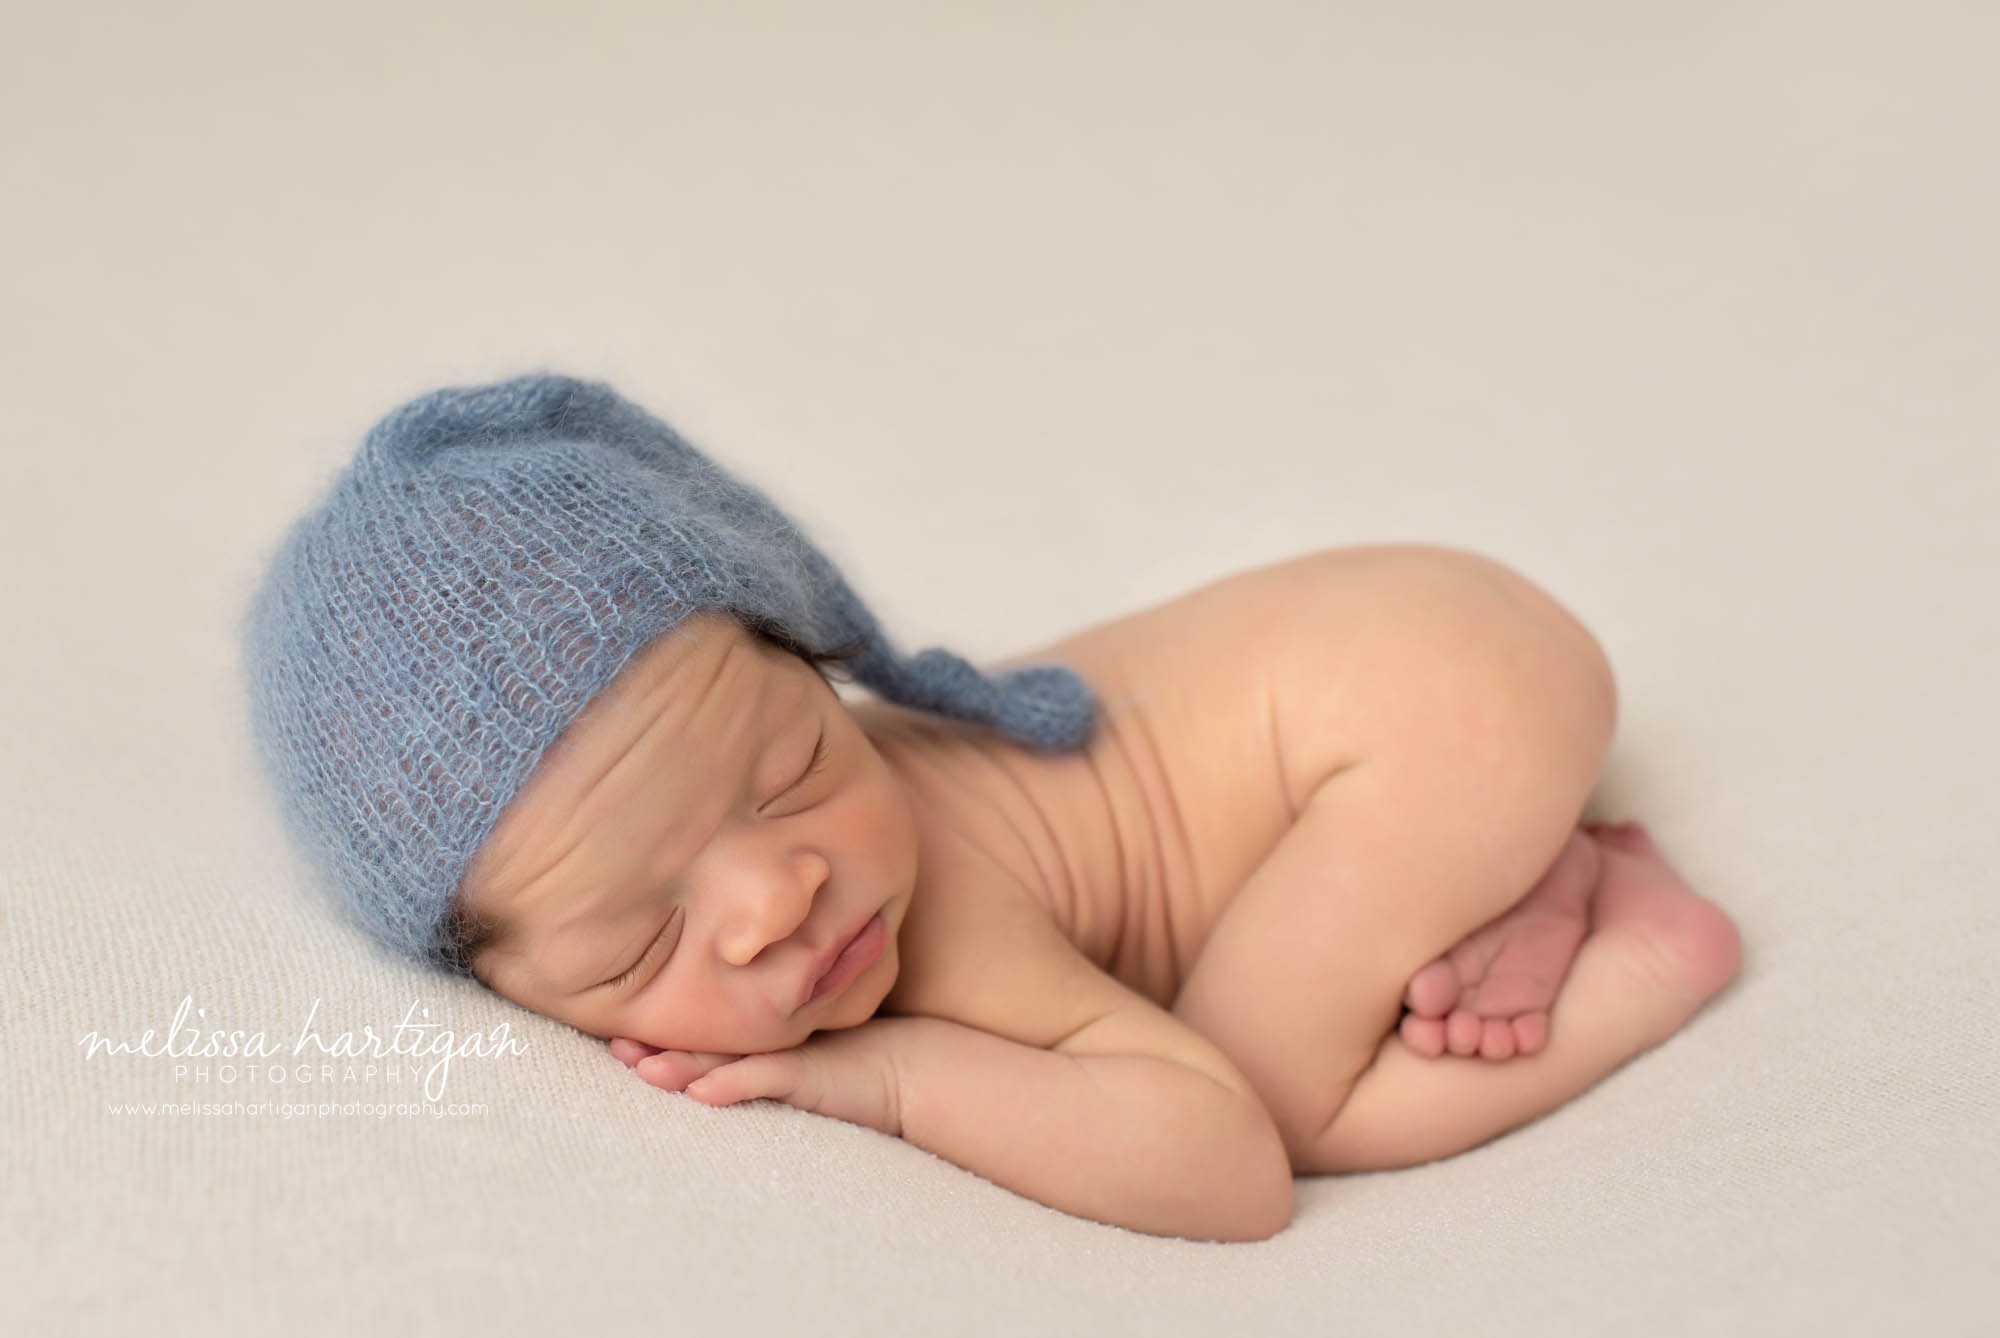 baby boy posed on belyl with bum up wearing blue knitted sleepy cap